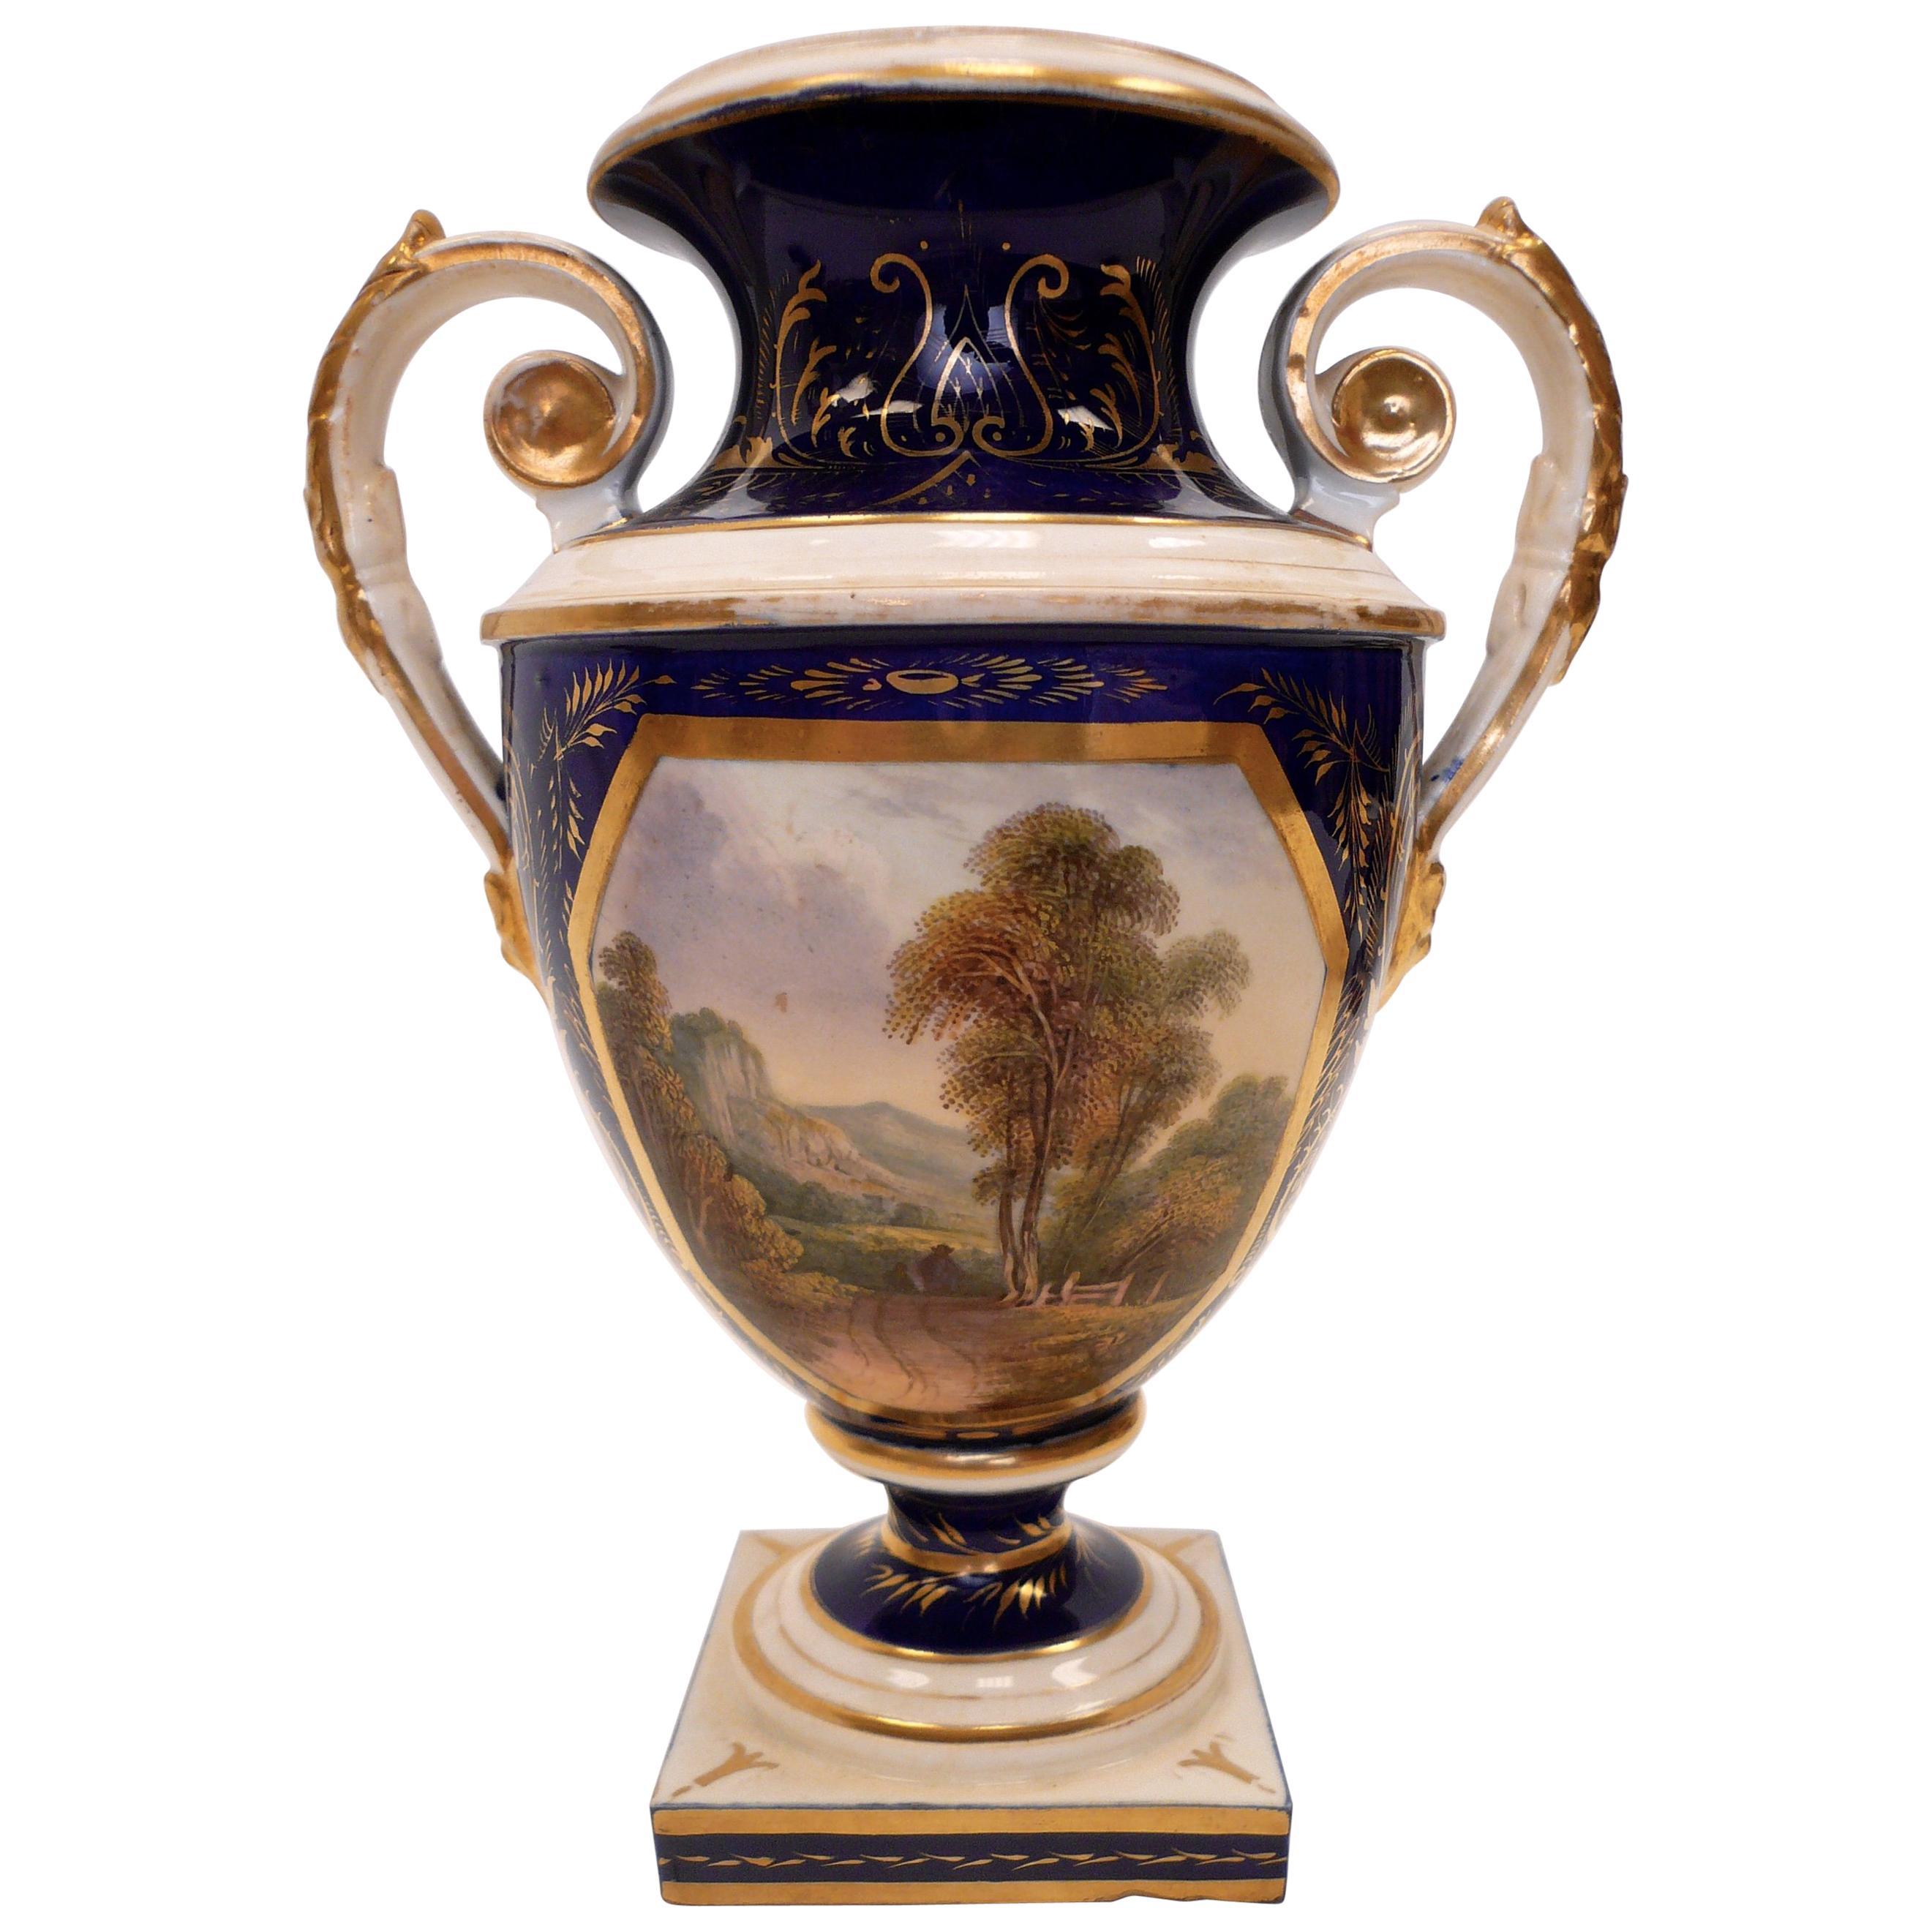 "View of Wales" 19th Century Hand-Painted Bloor Derby Porcelain Urn Form Vase